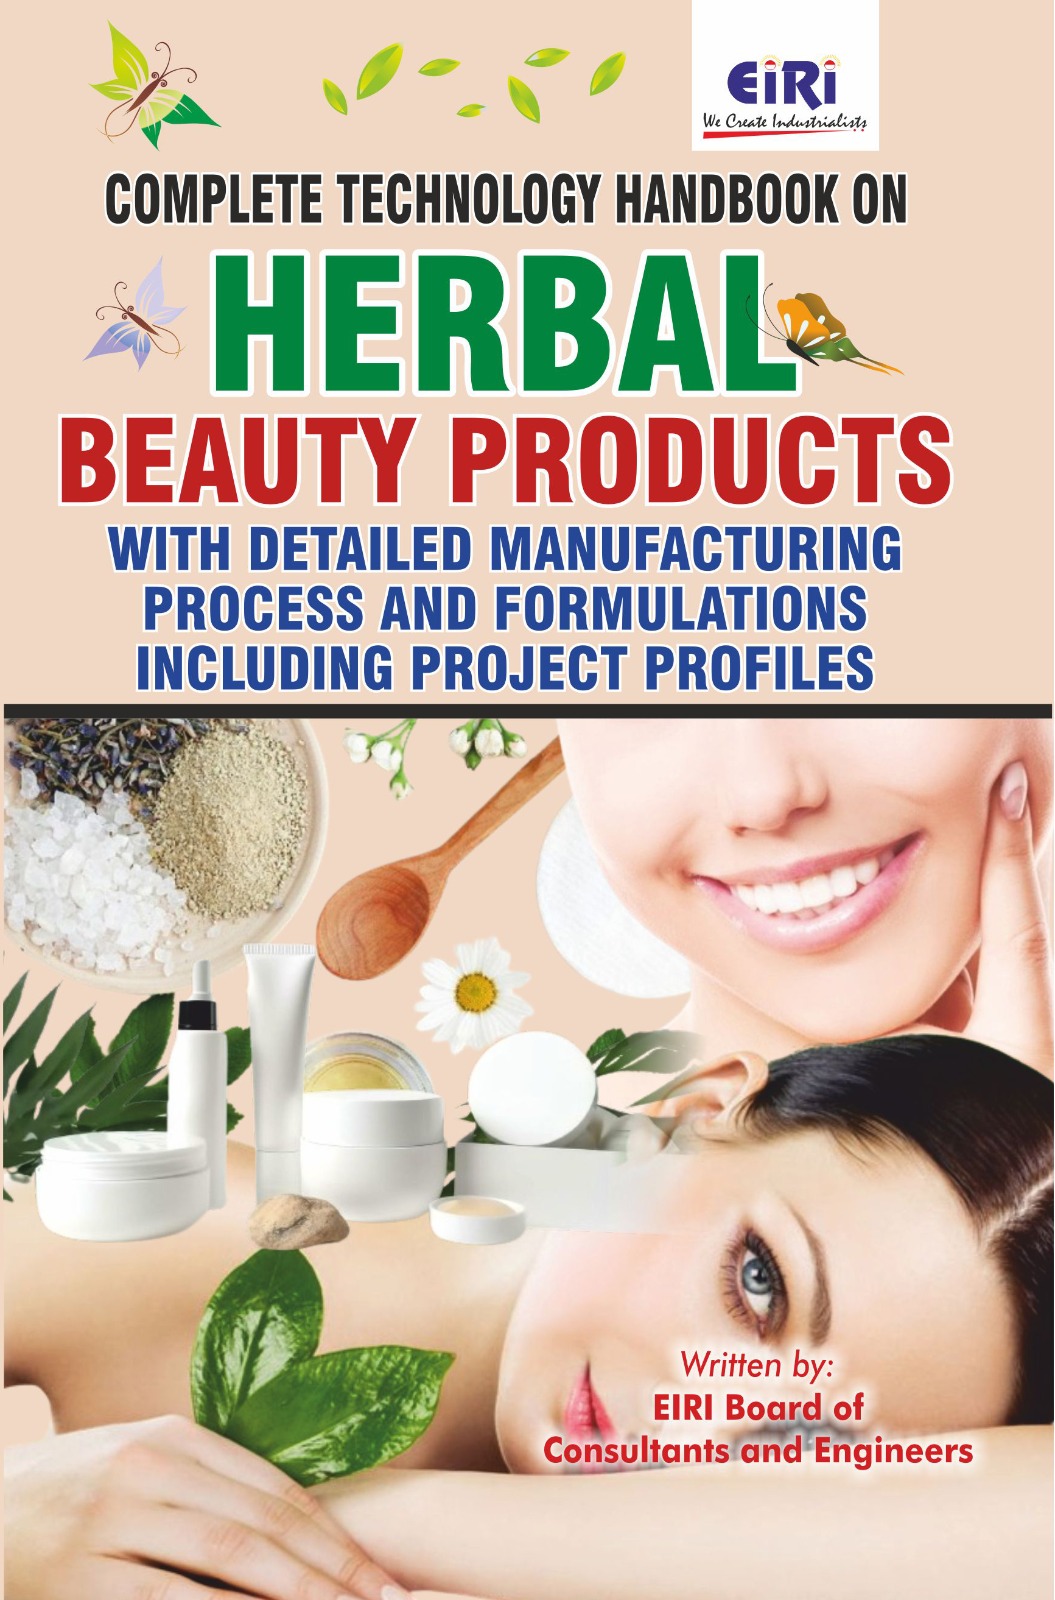 Complete Technology Handbook on Herbal Beauty Products with Detailed Manufacturing Process and Formulations including Project Profiles